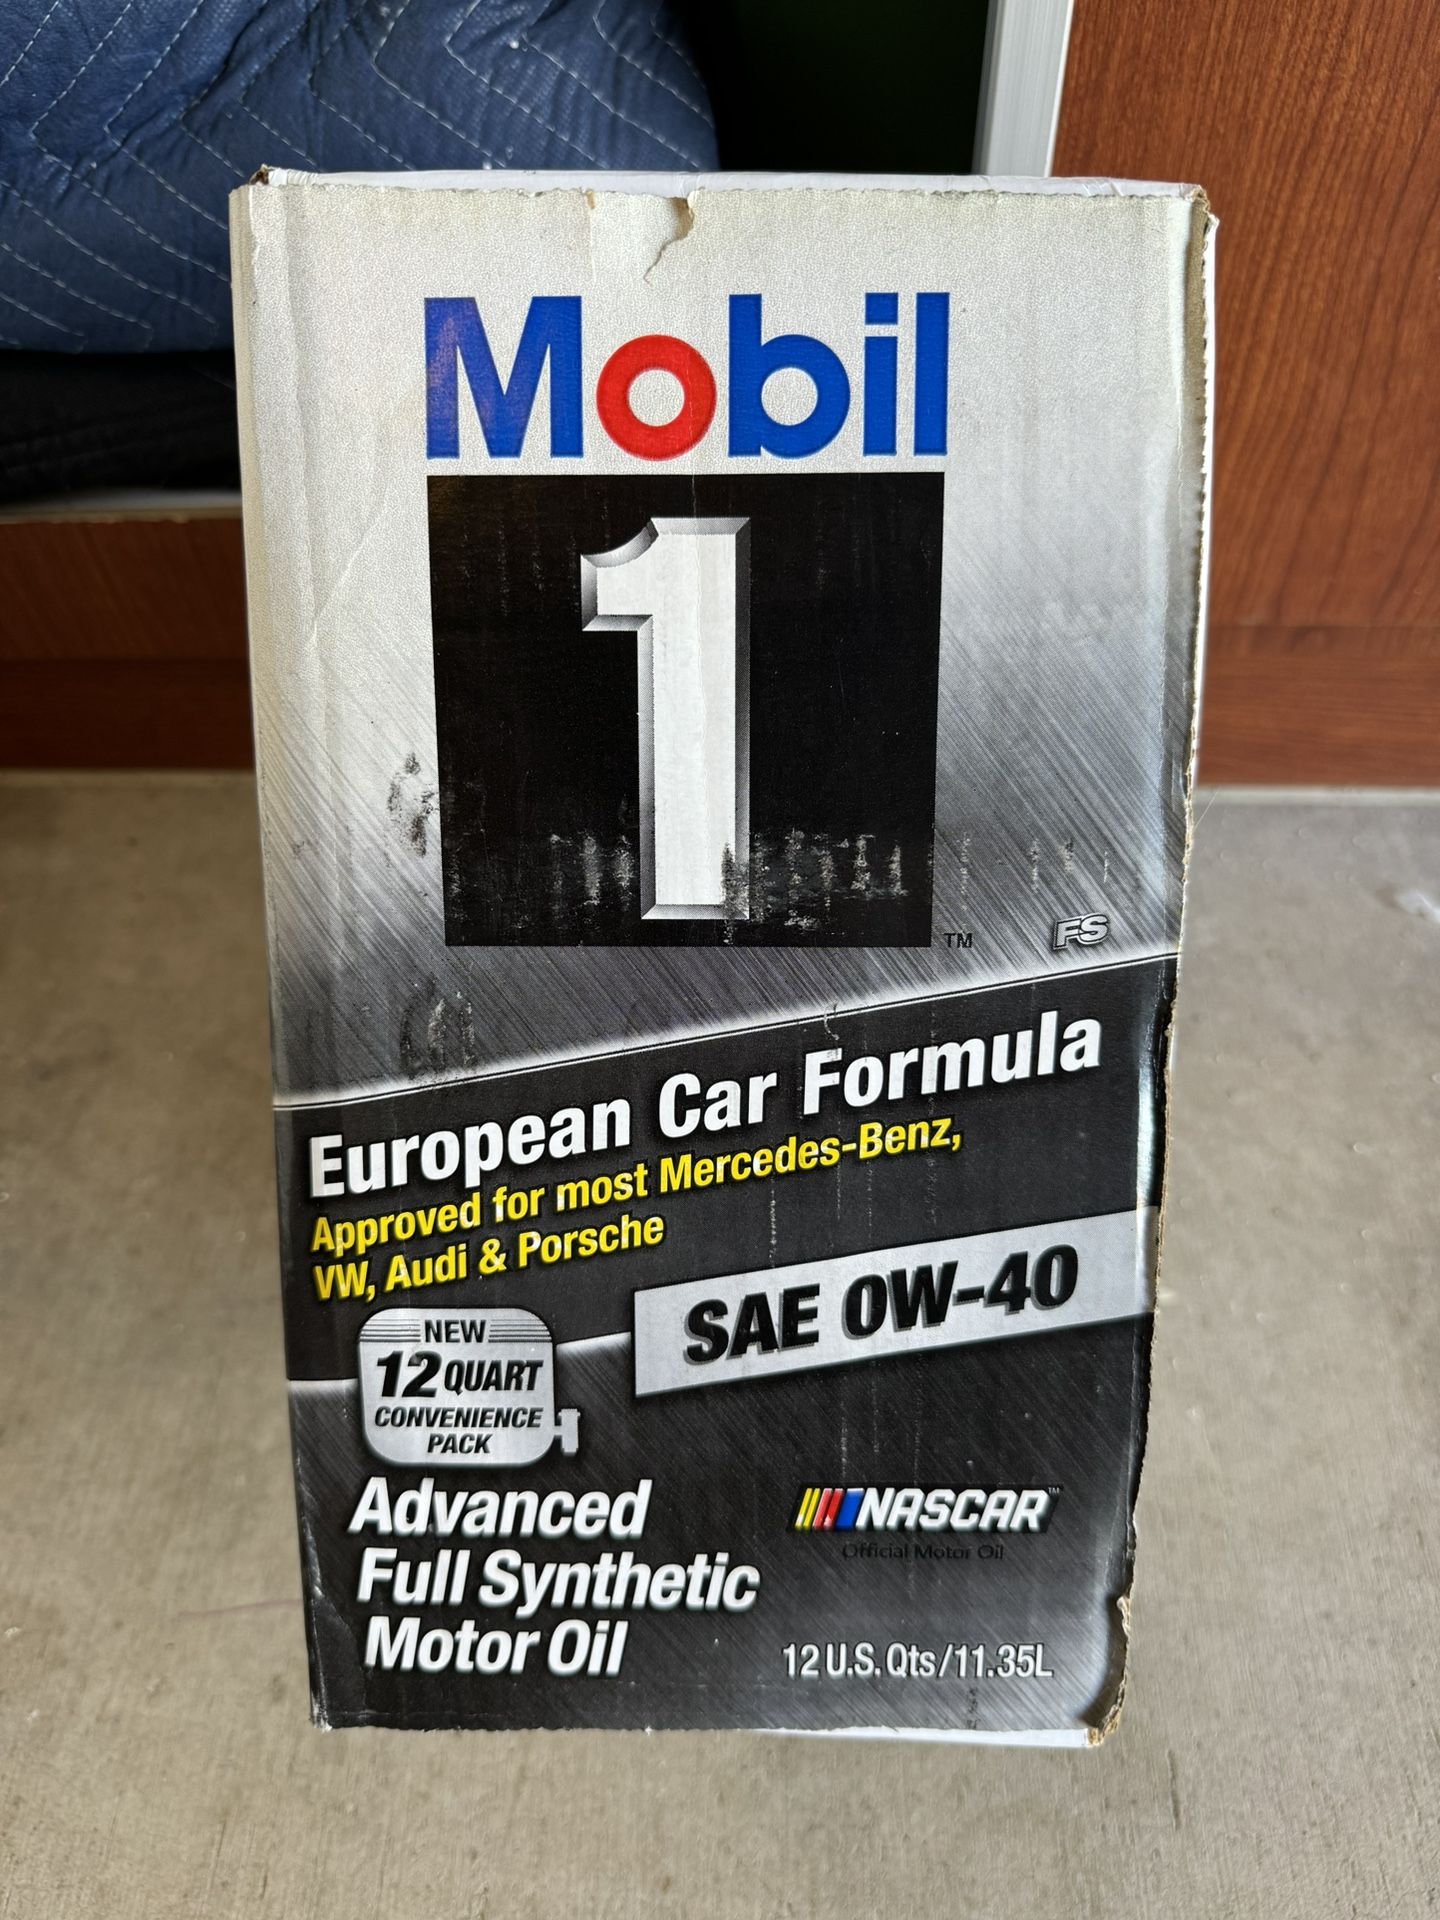 Mobil One 0w-40 17 Quarts of Full Synthetic Oil